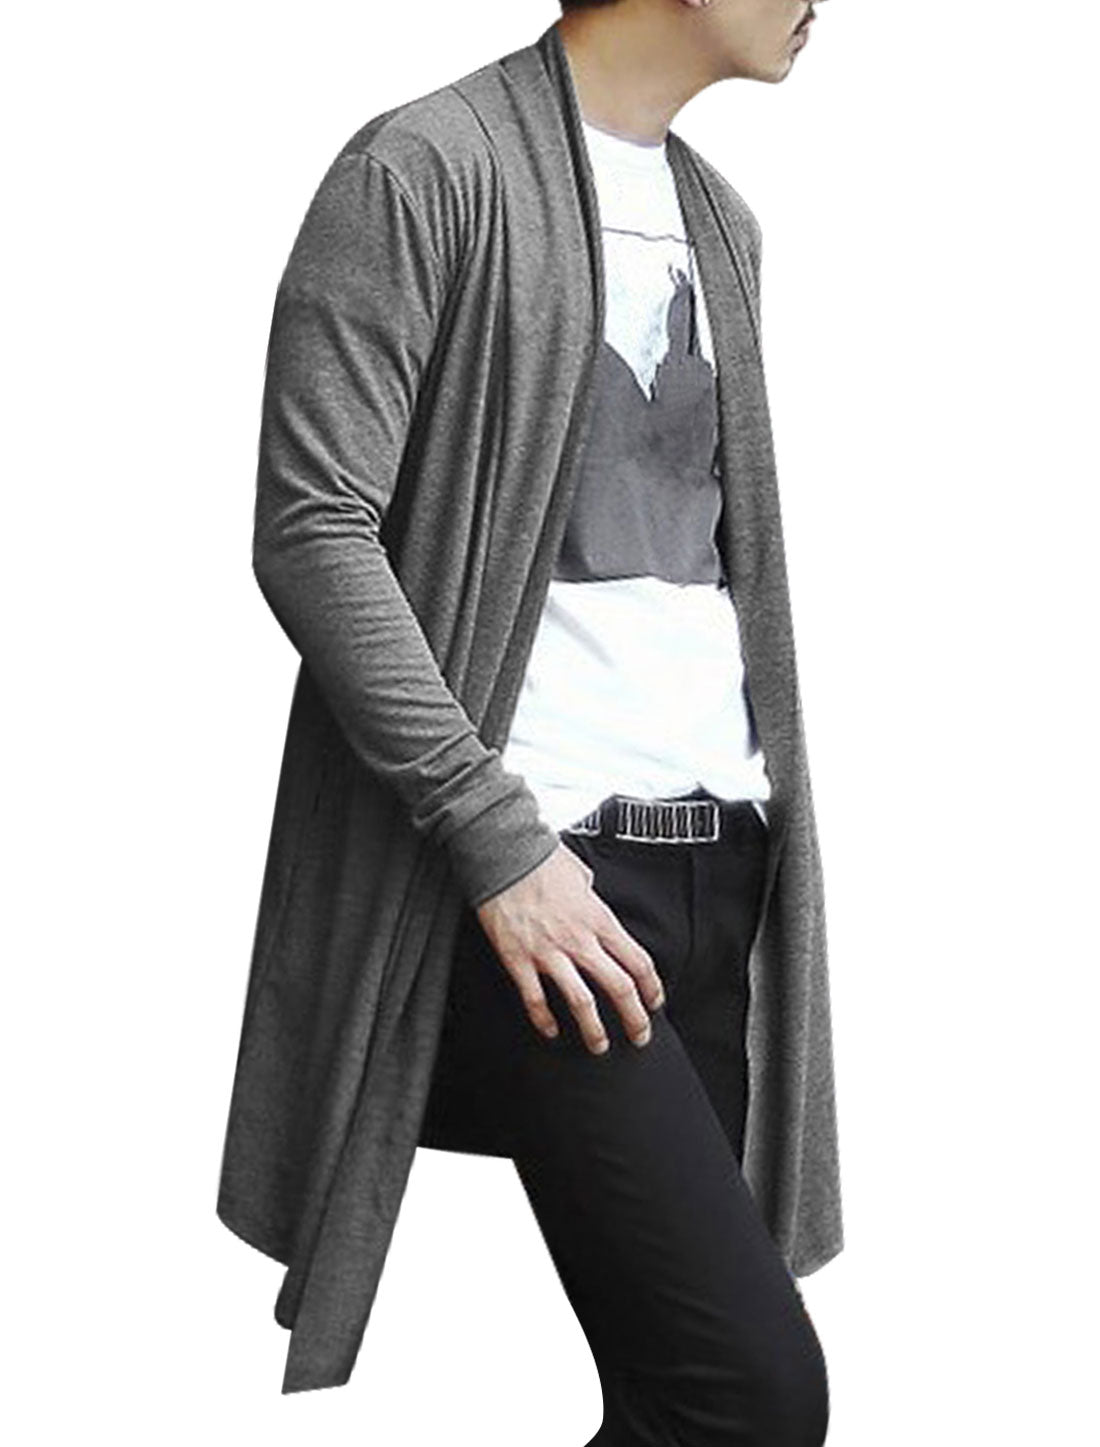 Bublédon Shawl Collar Open Front Long Sleeve Solid Jacket